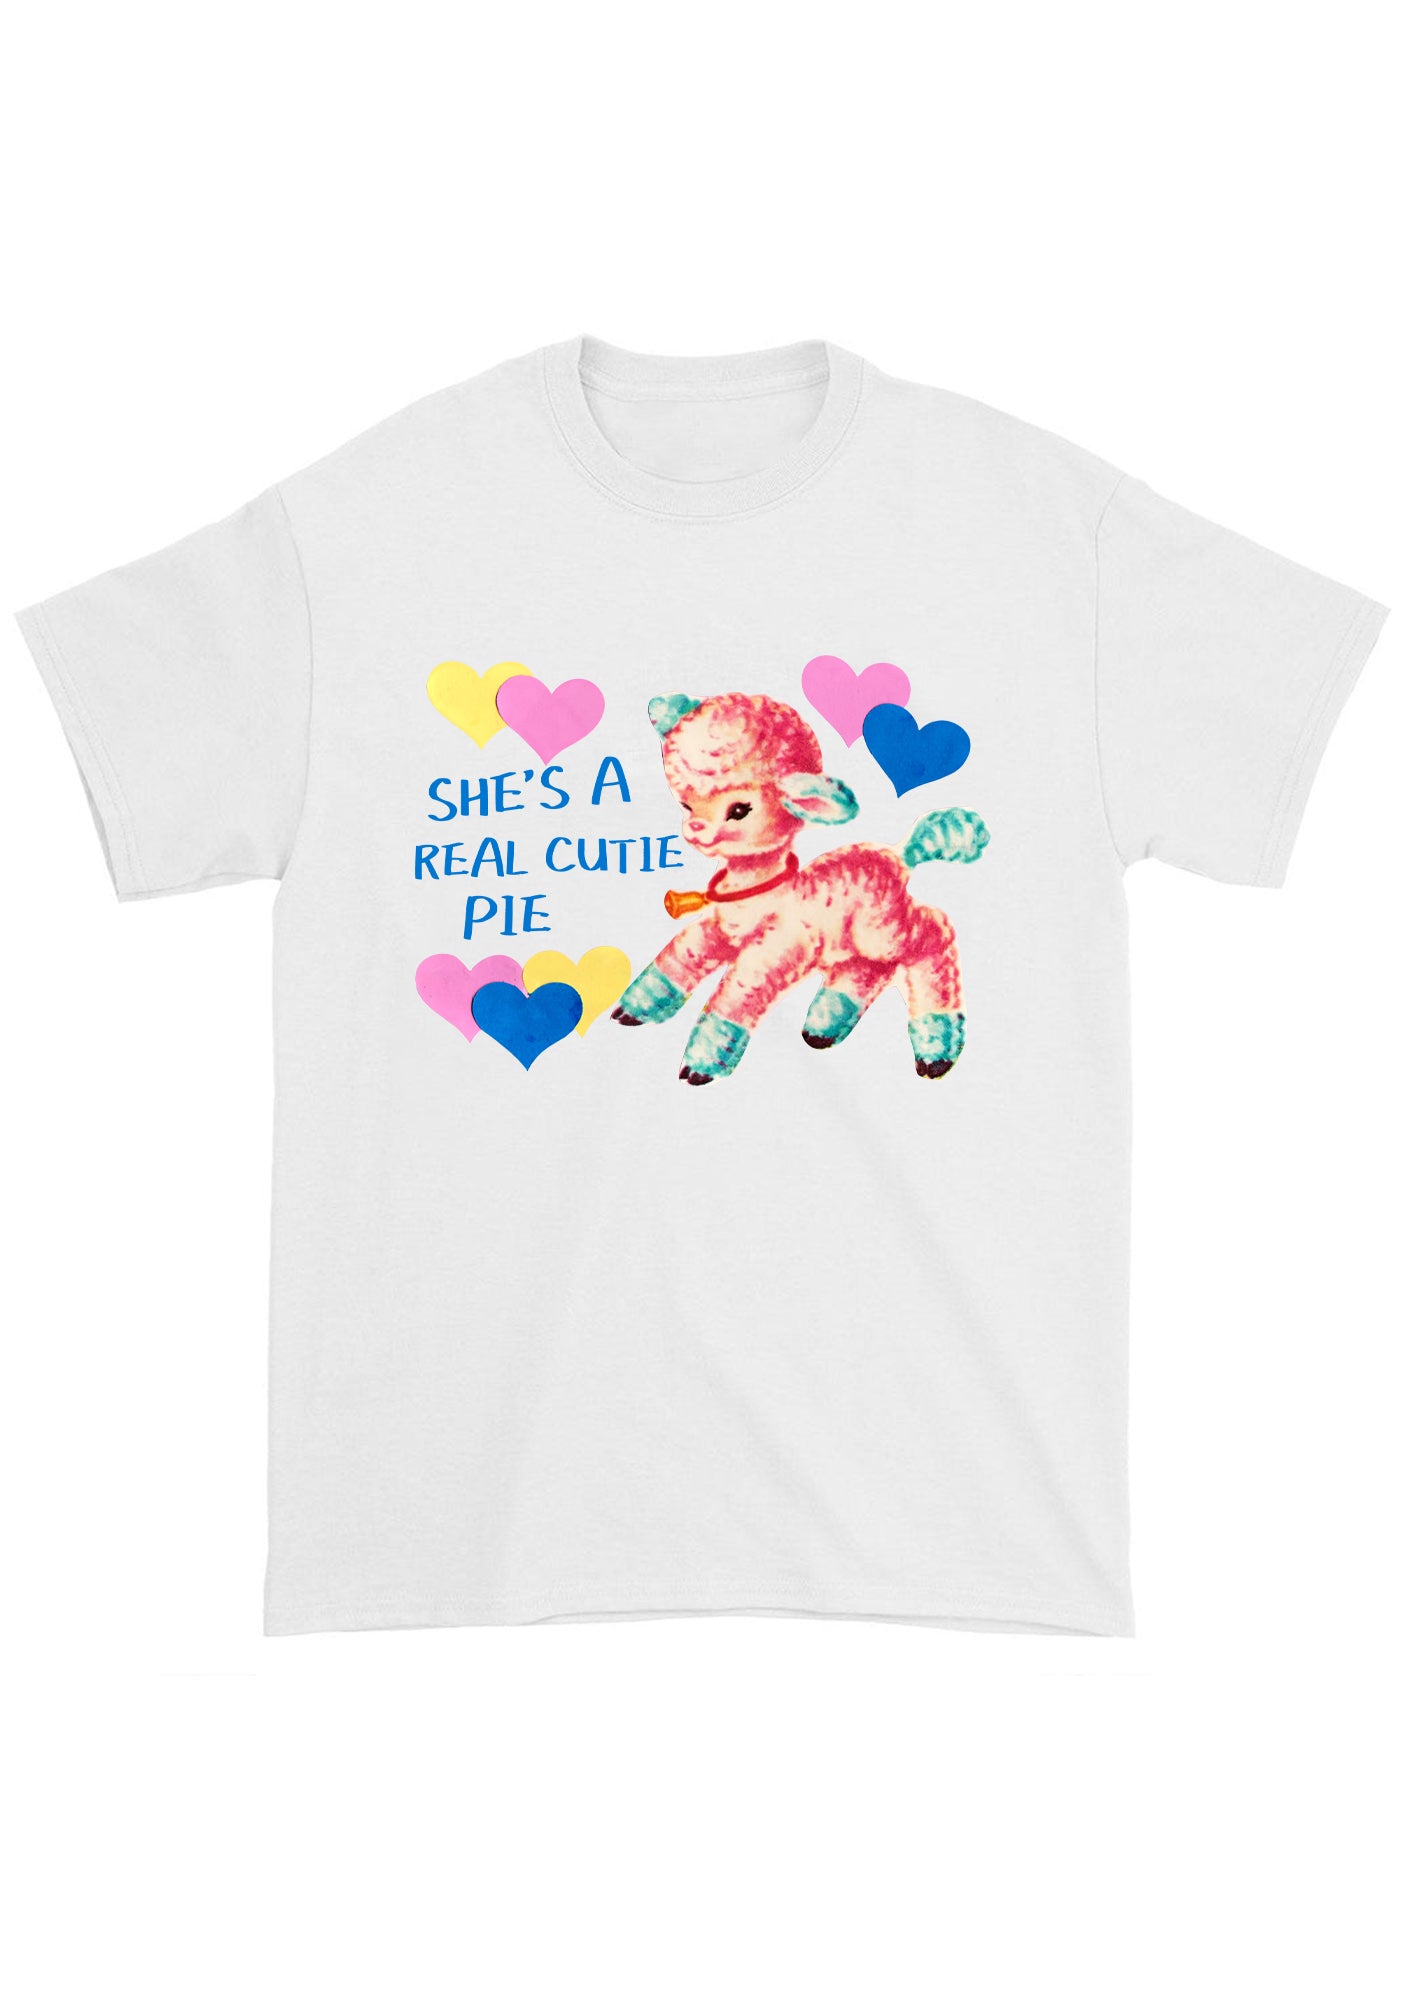 She's A Real Cutie Pie Chunky Shirt